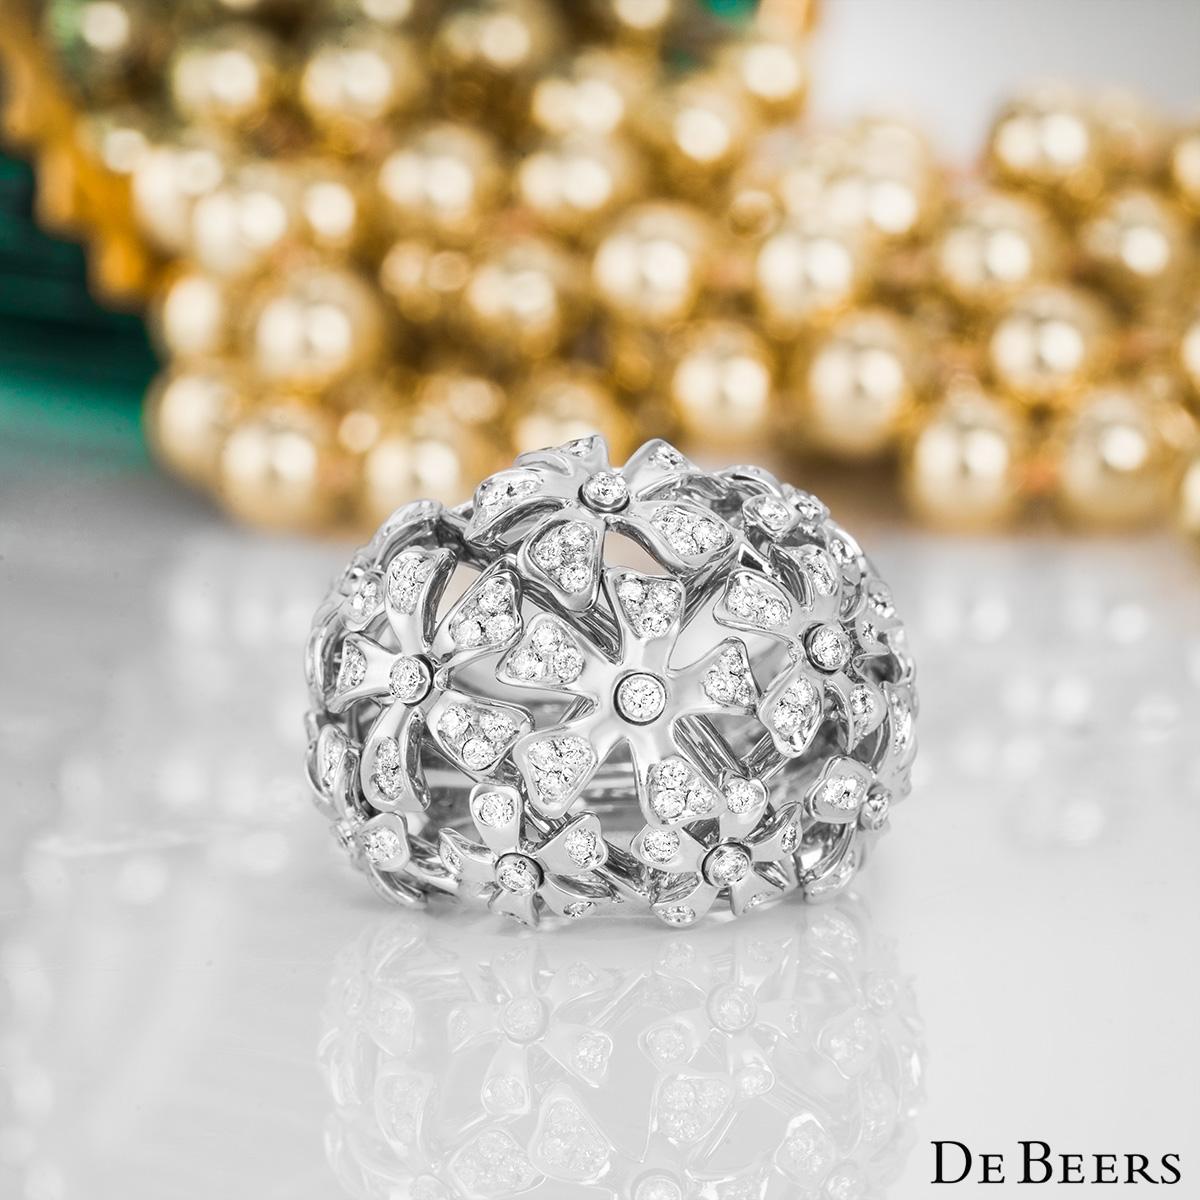 De Beers White Gold Diamond Flower Bombe Ring In Excellent Condition For Sale In London, GB